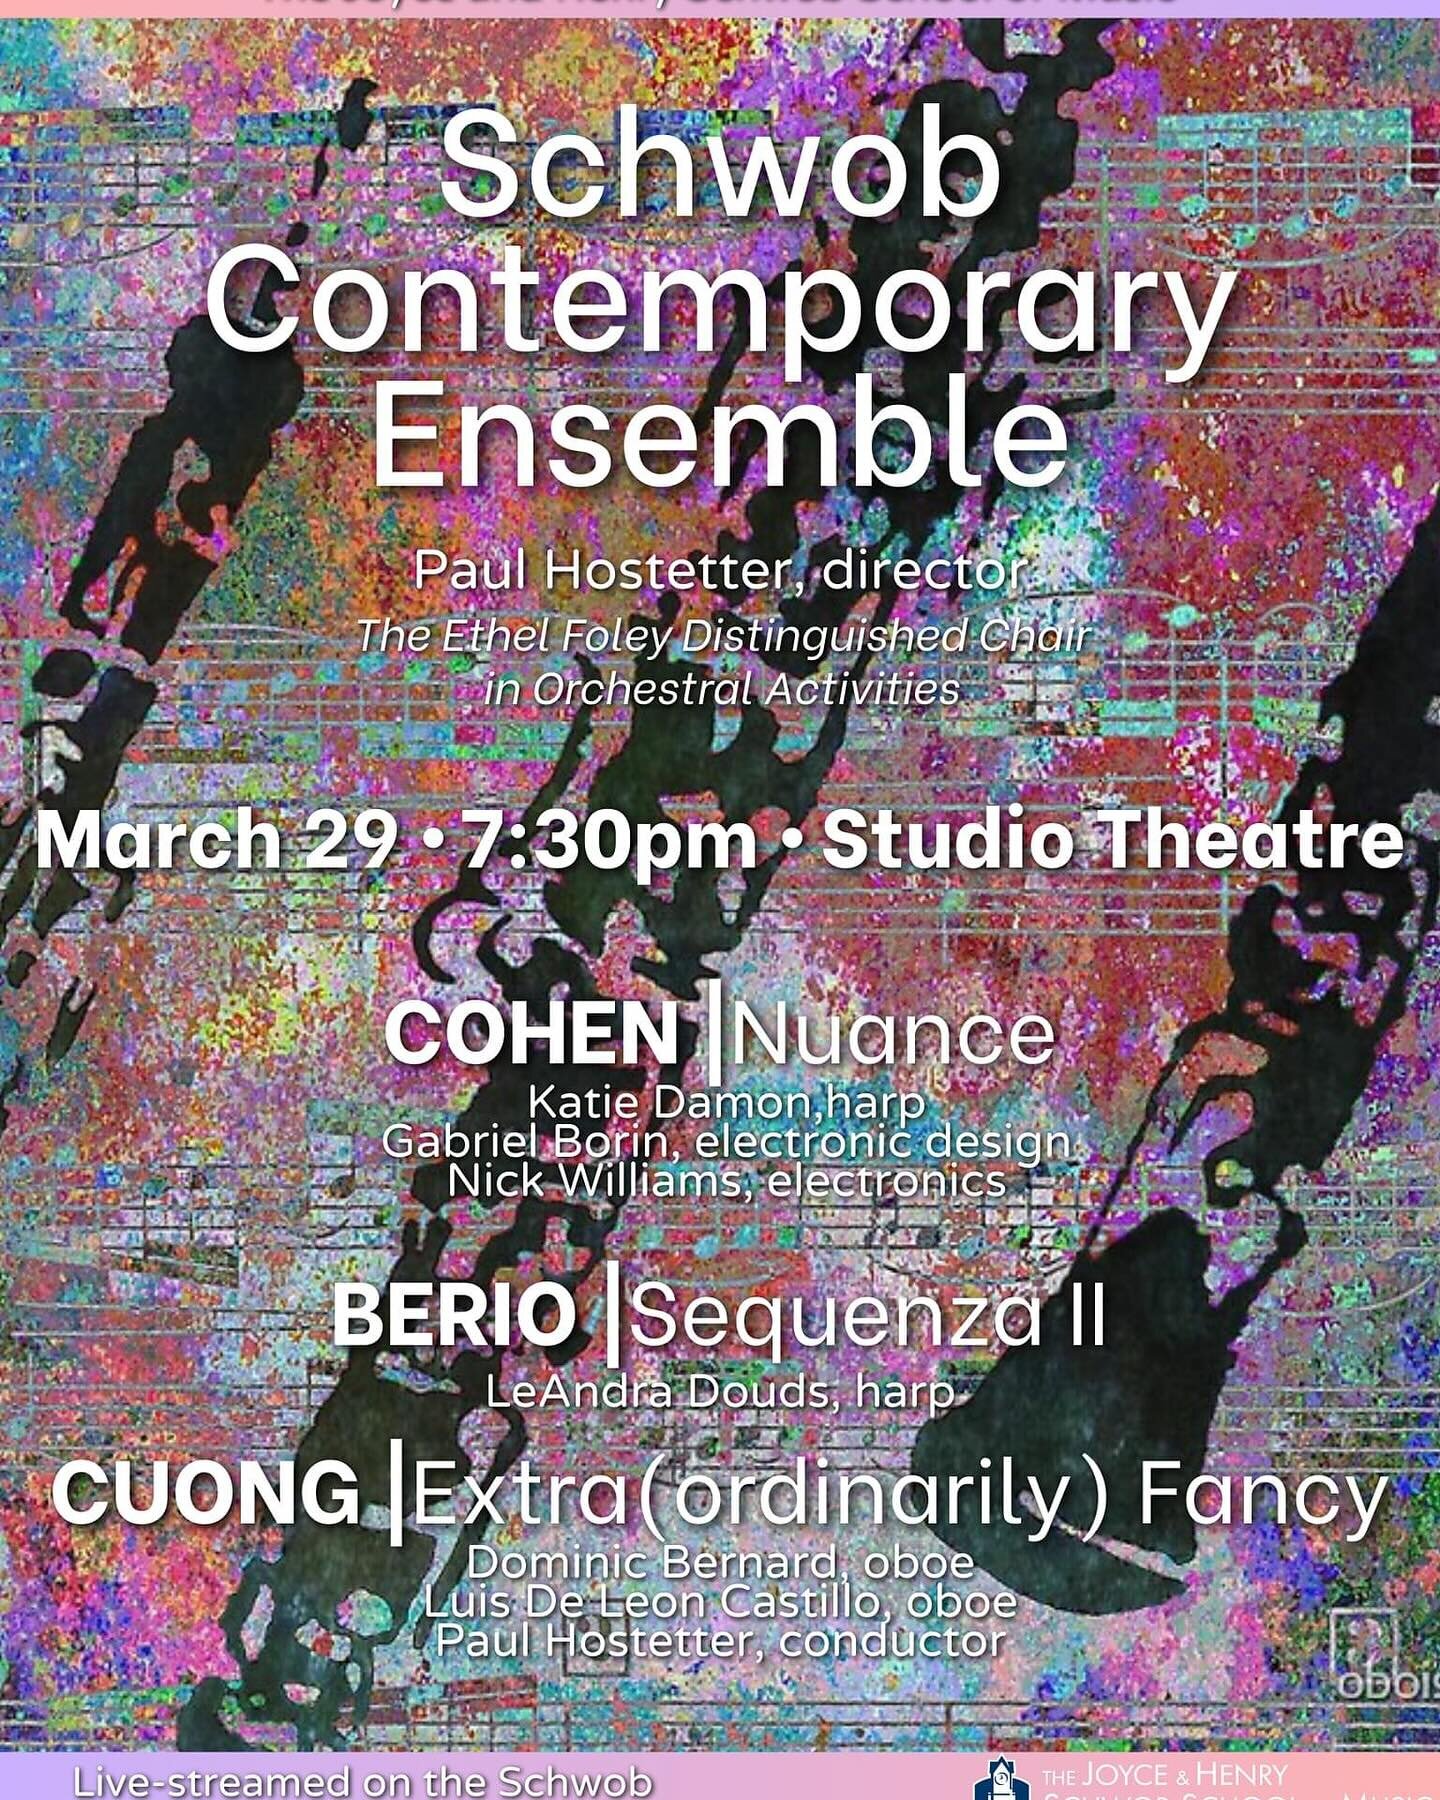 Join the Schwob Contemporary Ensemble this Friday March 29, 7:30 pm in Studio Theatre. 
Schwoboes Dominic Bernard (@dominic_bernard) and Luis De Leon (@deleonoboist) will be performing Viet Cuong&rsquo;s &ldquo;Extra(ordinarily) Fancy&rdquo;. 
This c